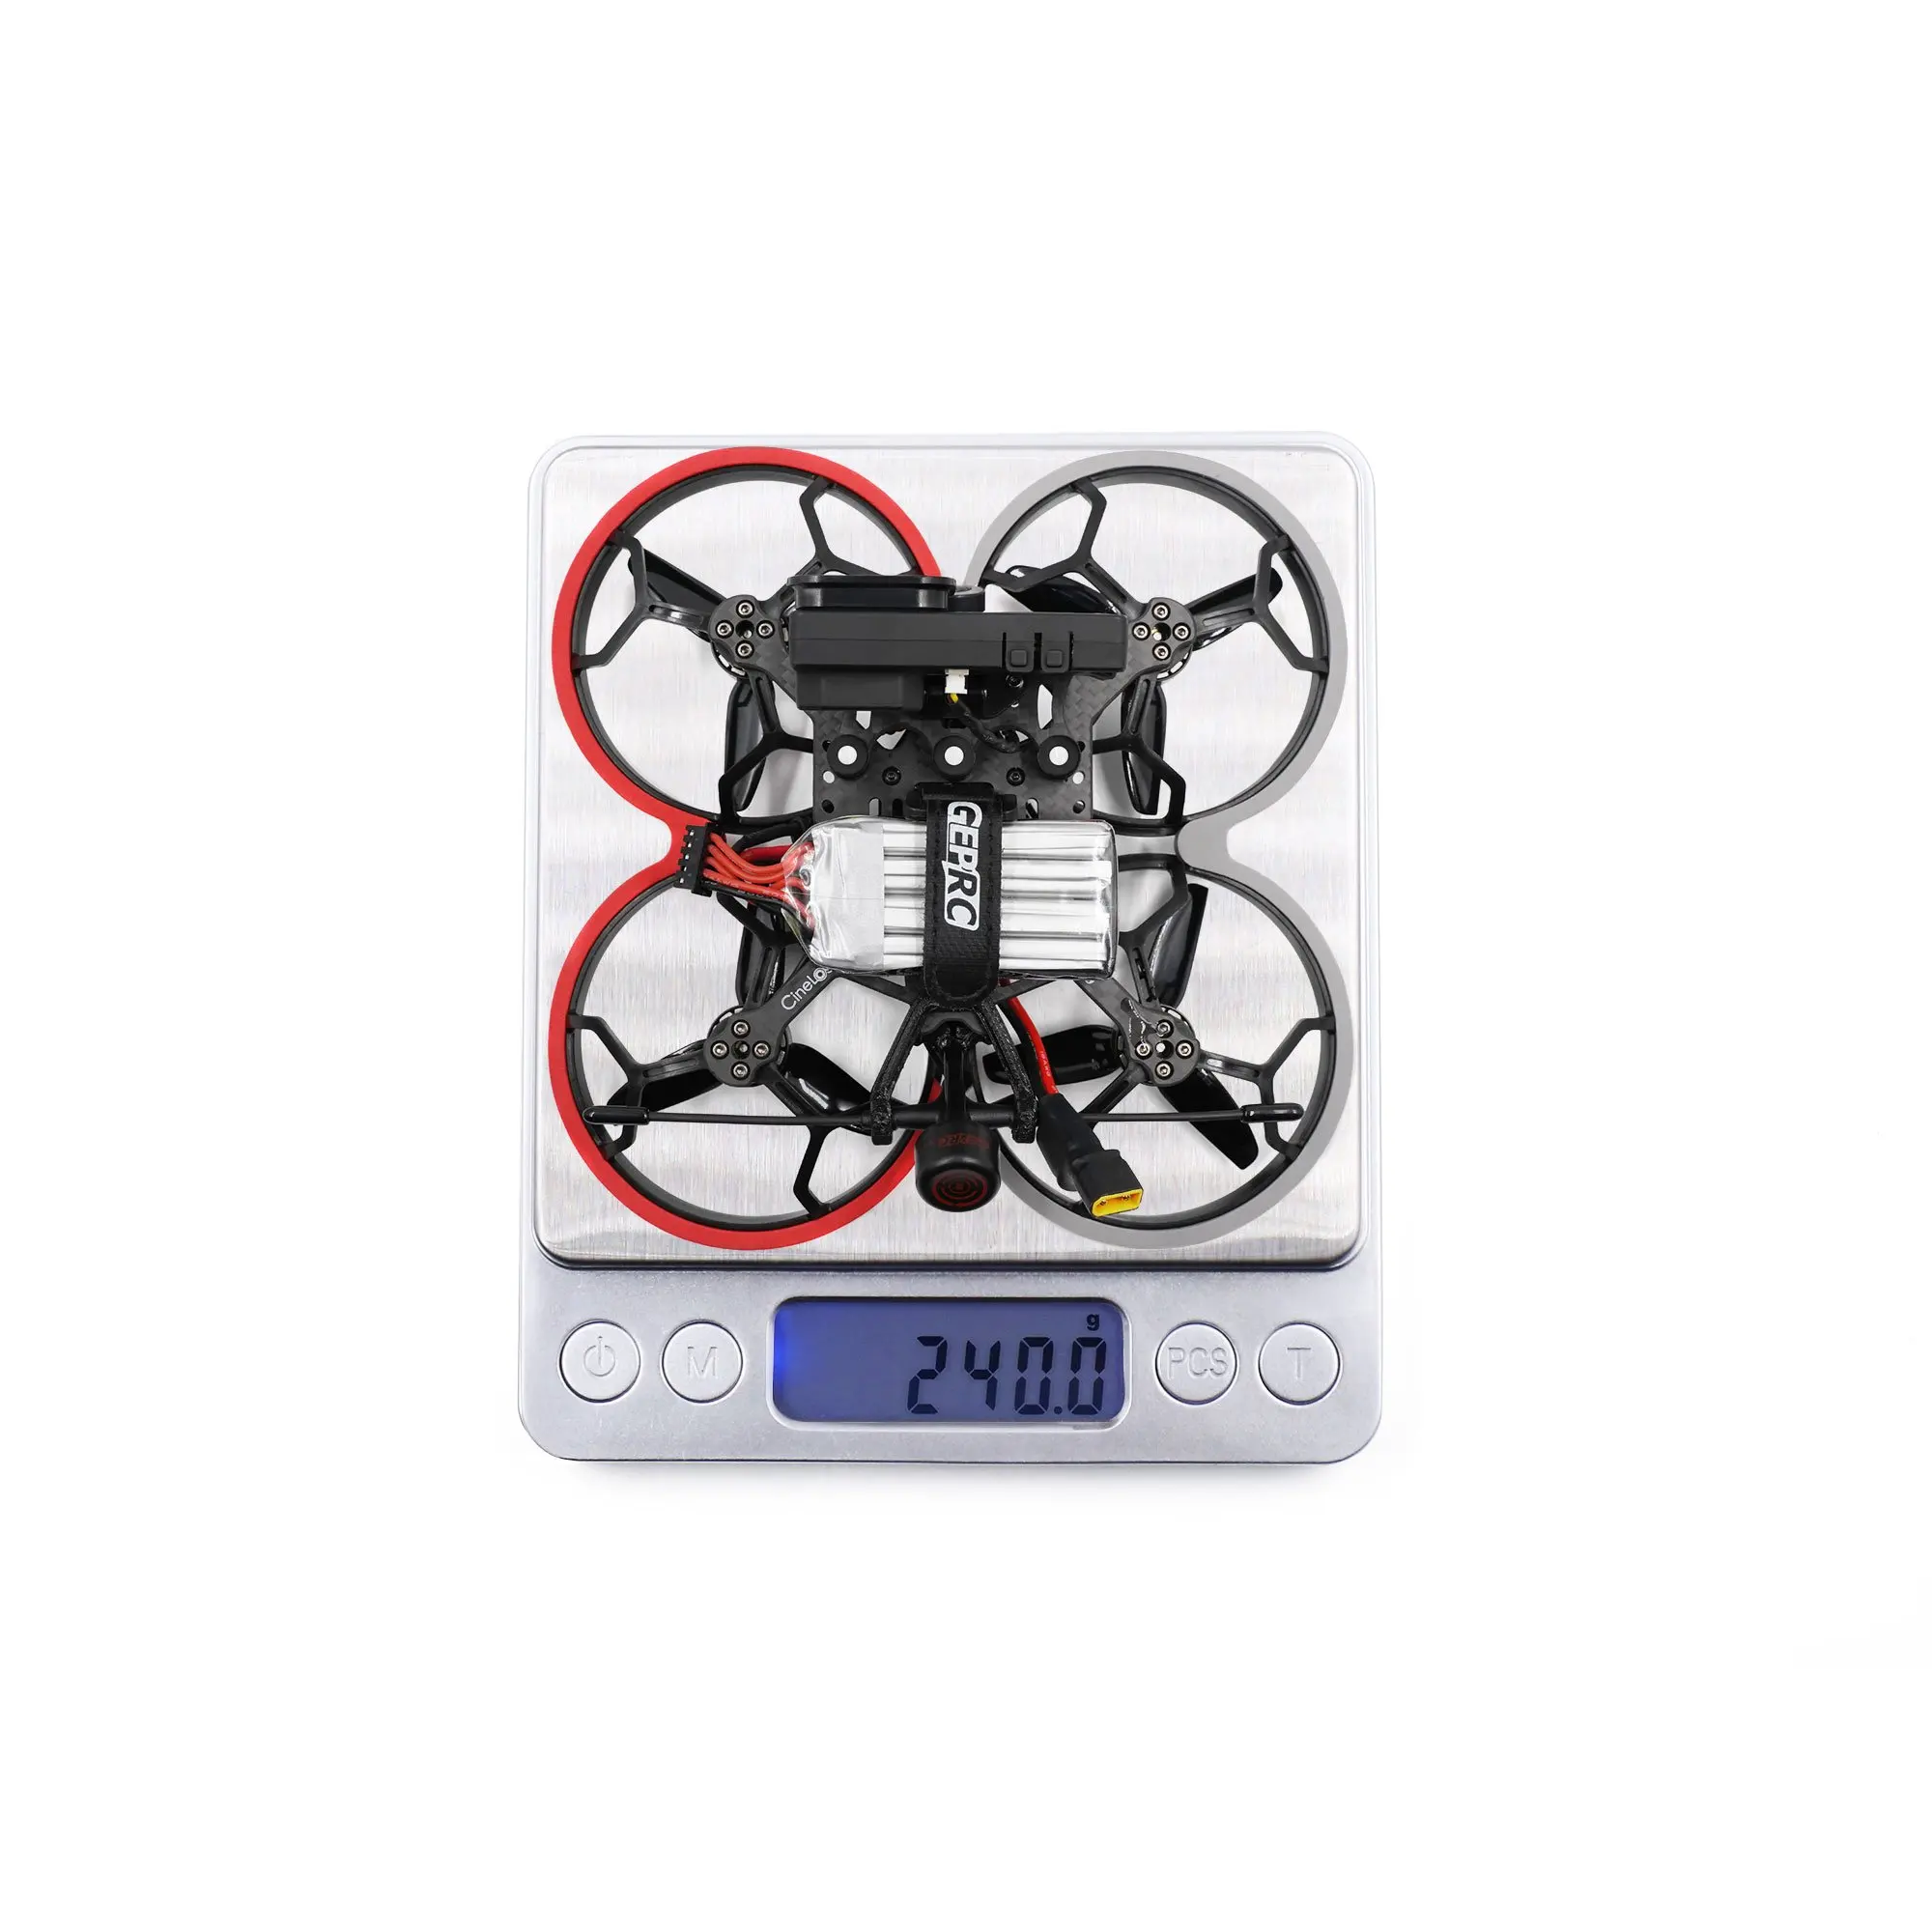 GEPRC CineLog30 Analog GEP-F411-35A AIO 600mW Caddx Ratel2 GR1404 3850KV 4S 126mm 3inch FPV Cinewhoop Ducted Drone images - 6